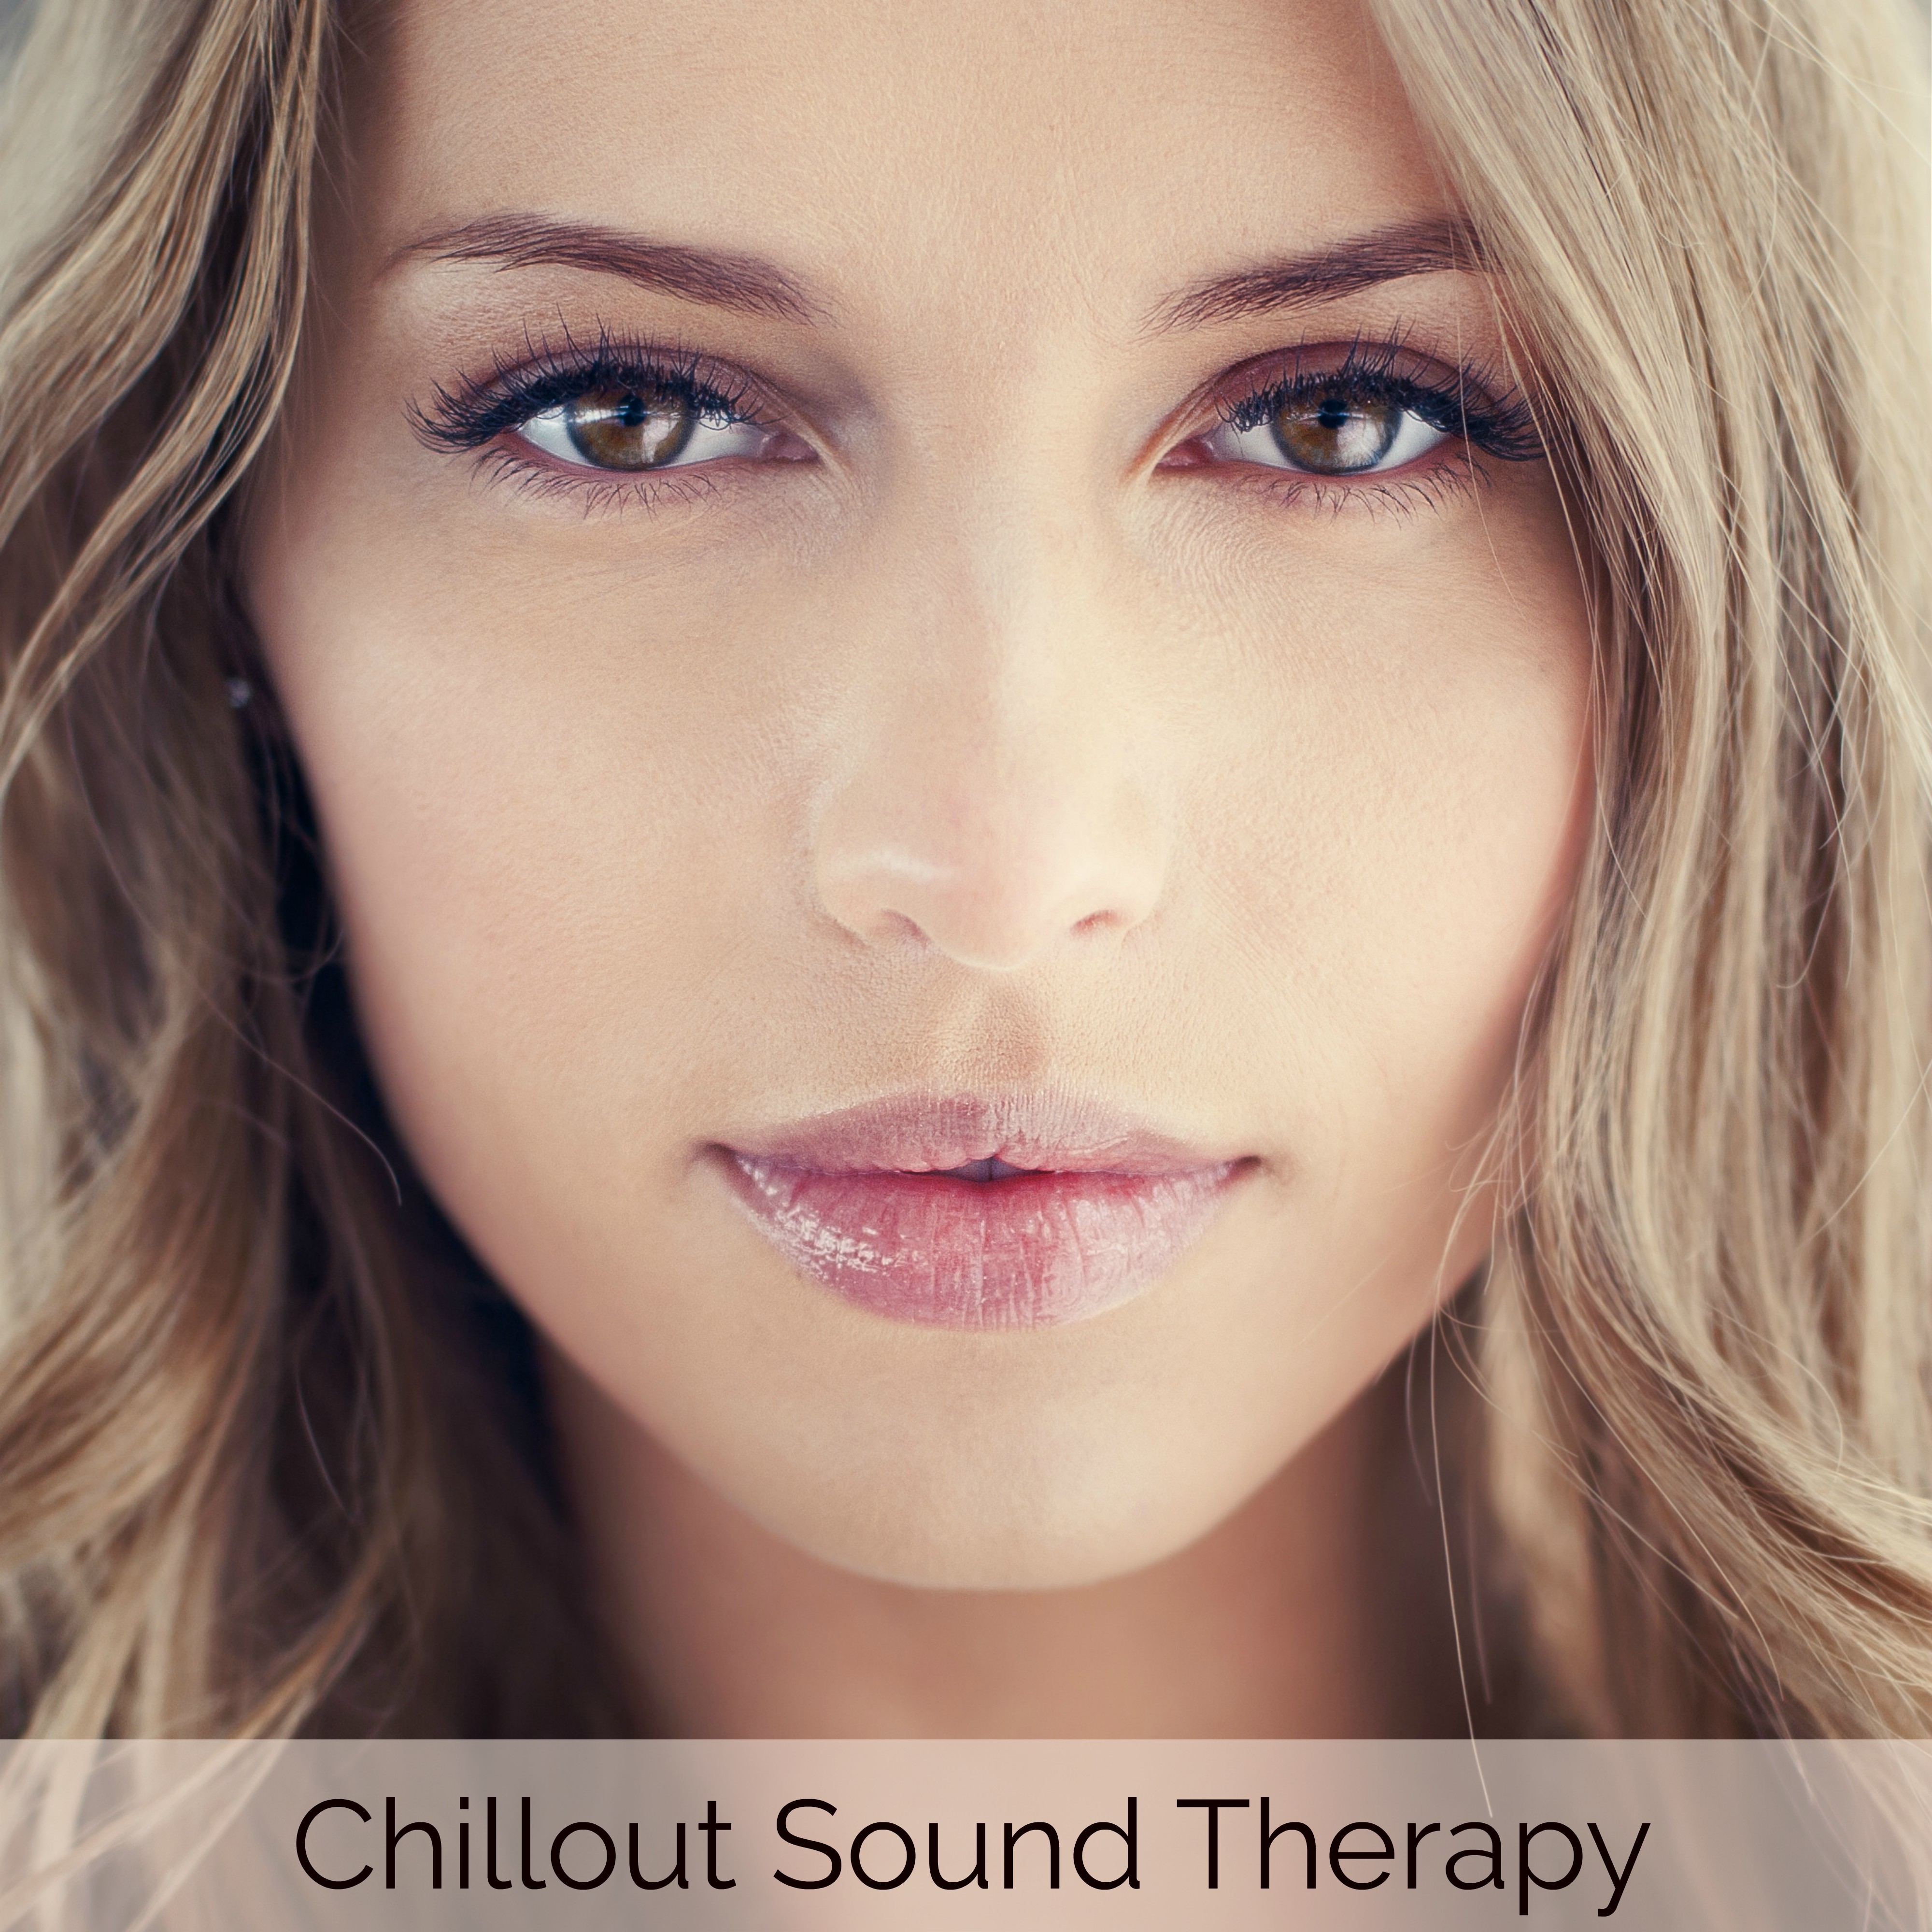 Chillout Sound Therapy  Smooth and Sensual Soothing Sounds  Relaxing Tracks to Chill, Be Positive Feeling Good